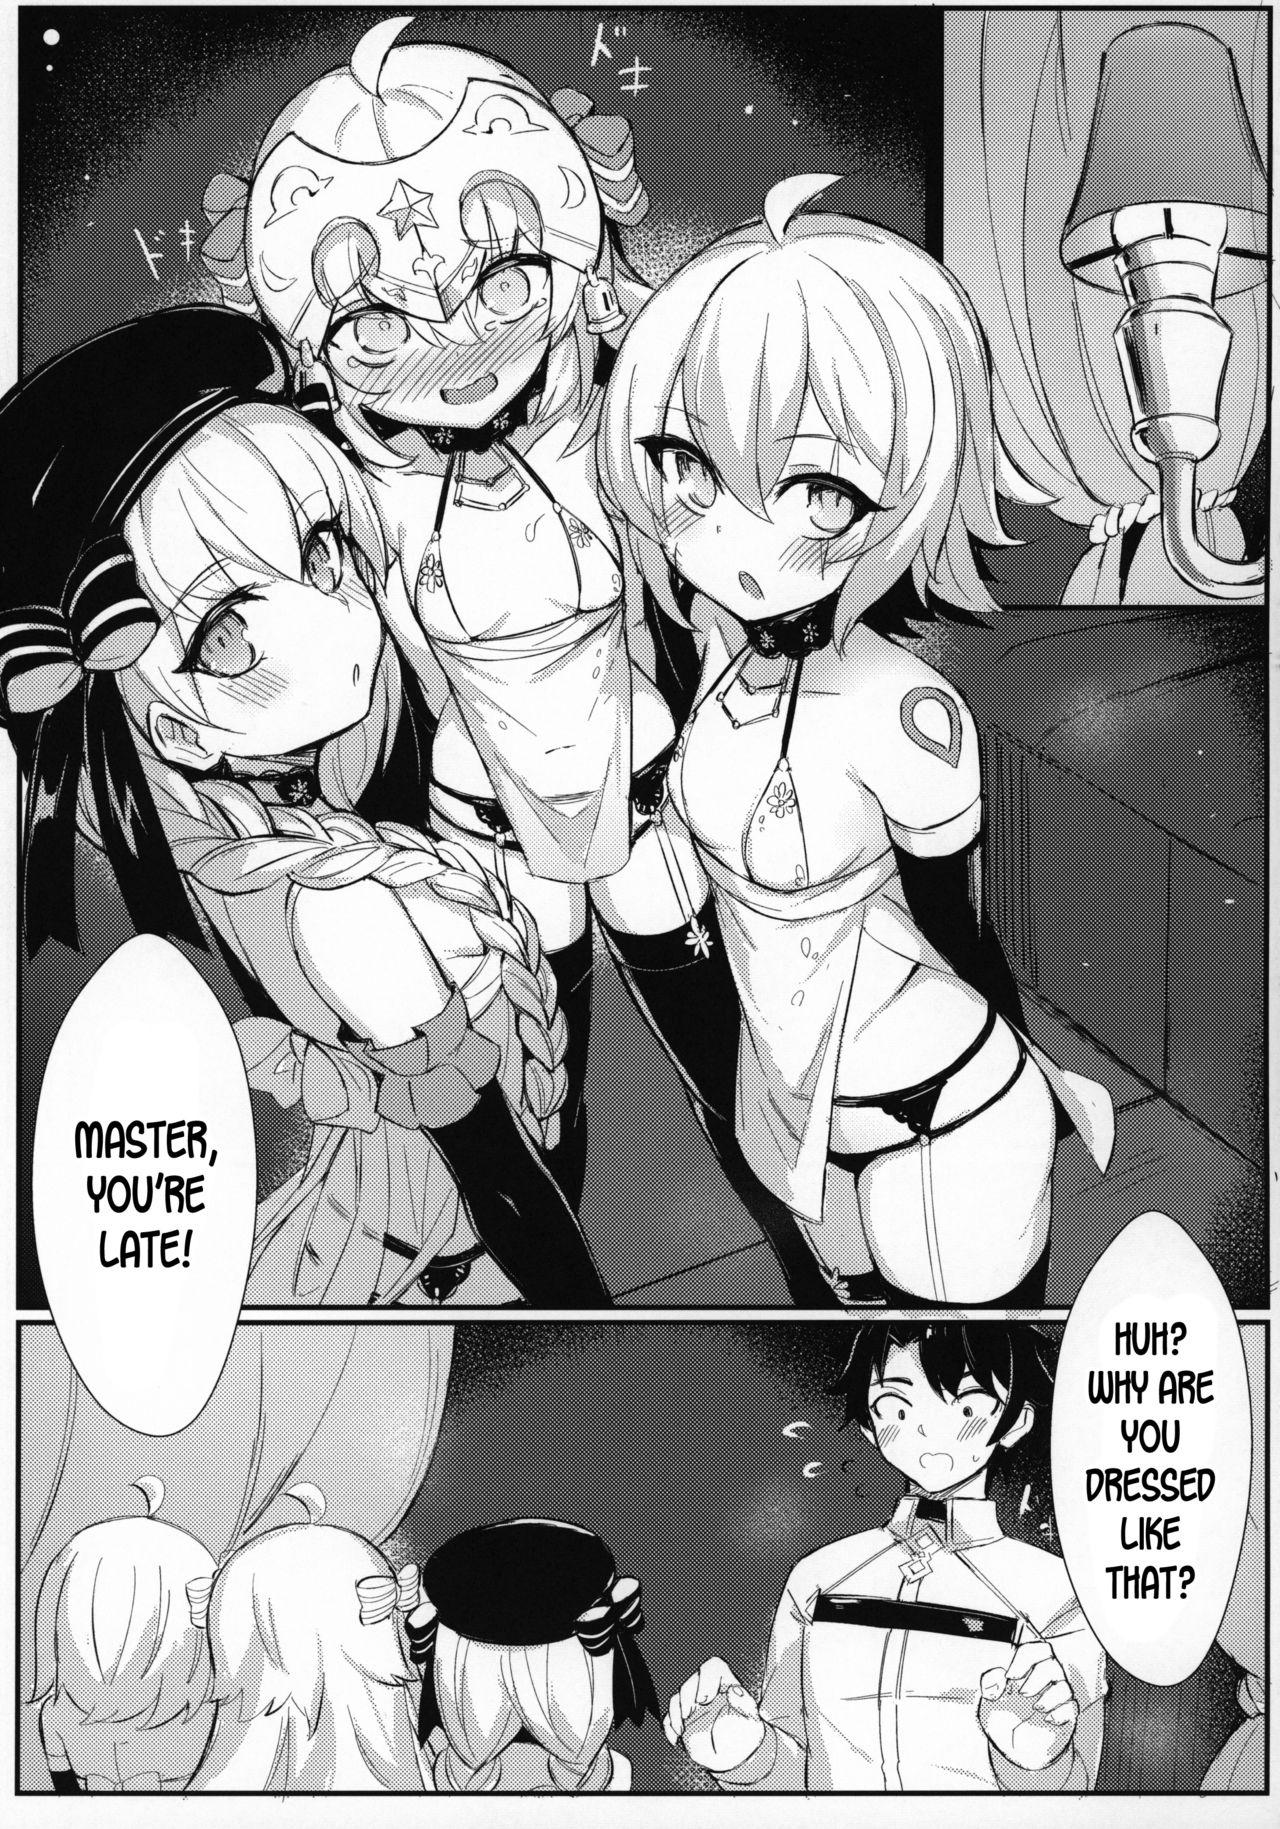 Masseur OH! MASTER - Fate grand order Skype - Page 4